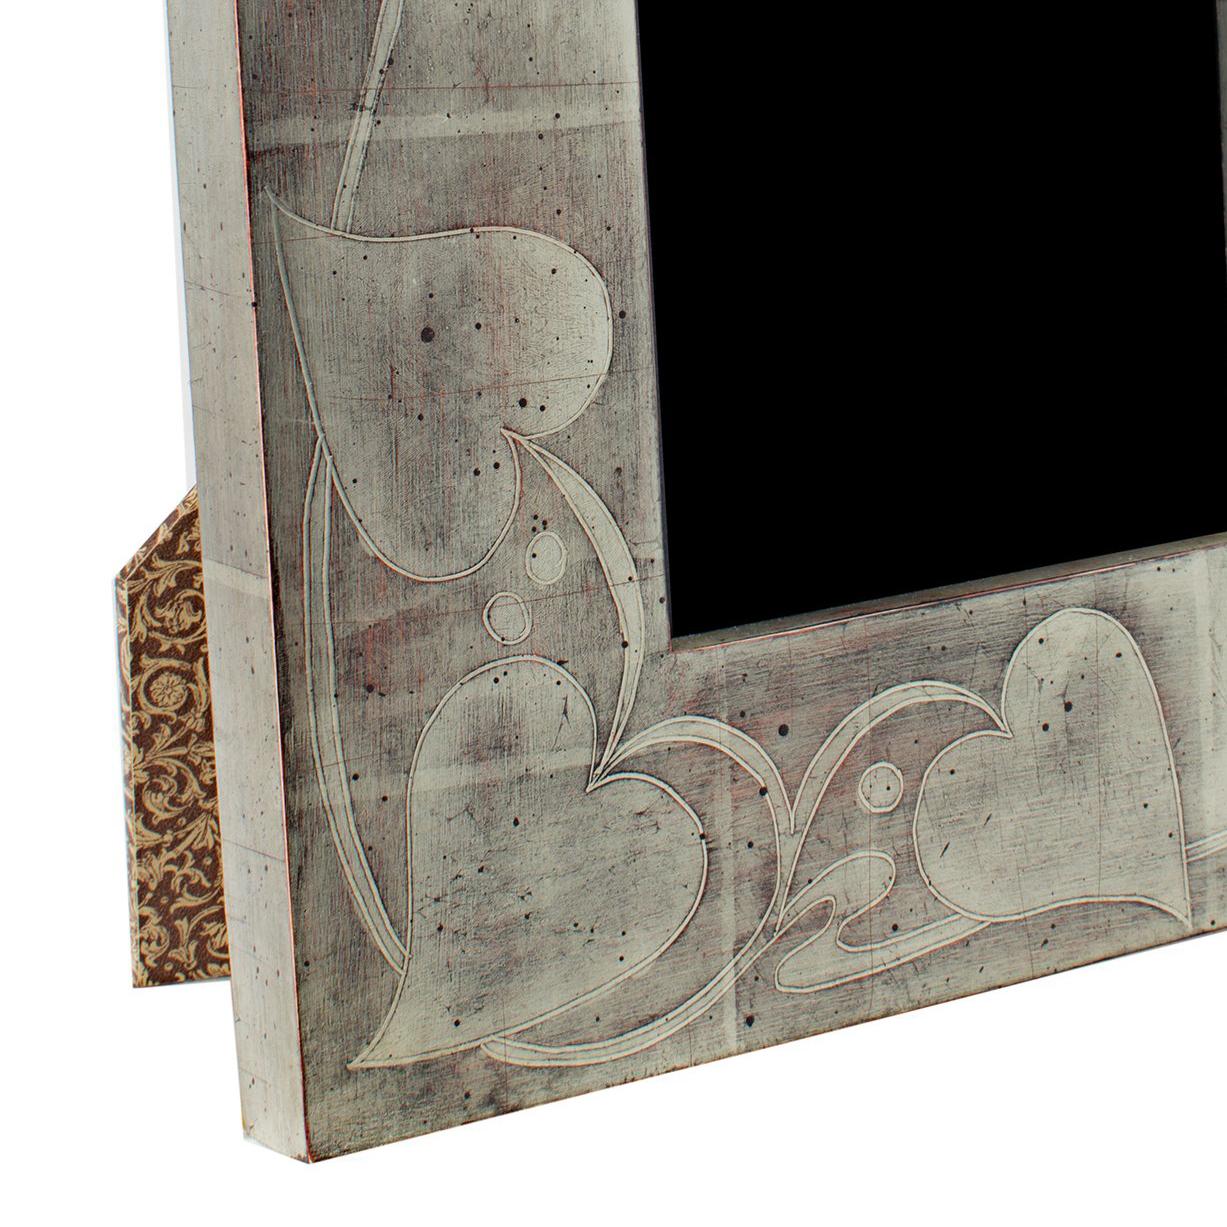 This photo frame was hand-made in Romania and features 12K white gold leafing. It is made out of wood and includes archival plexiglass to protect anything displayed in it from fading or other damage from light. This frame can be used both vertically